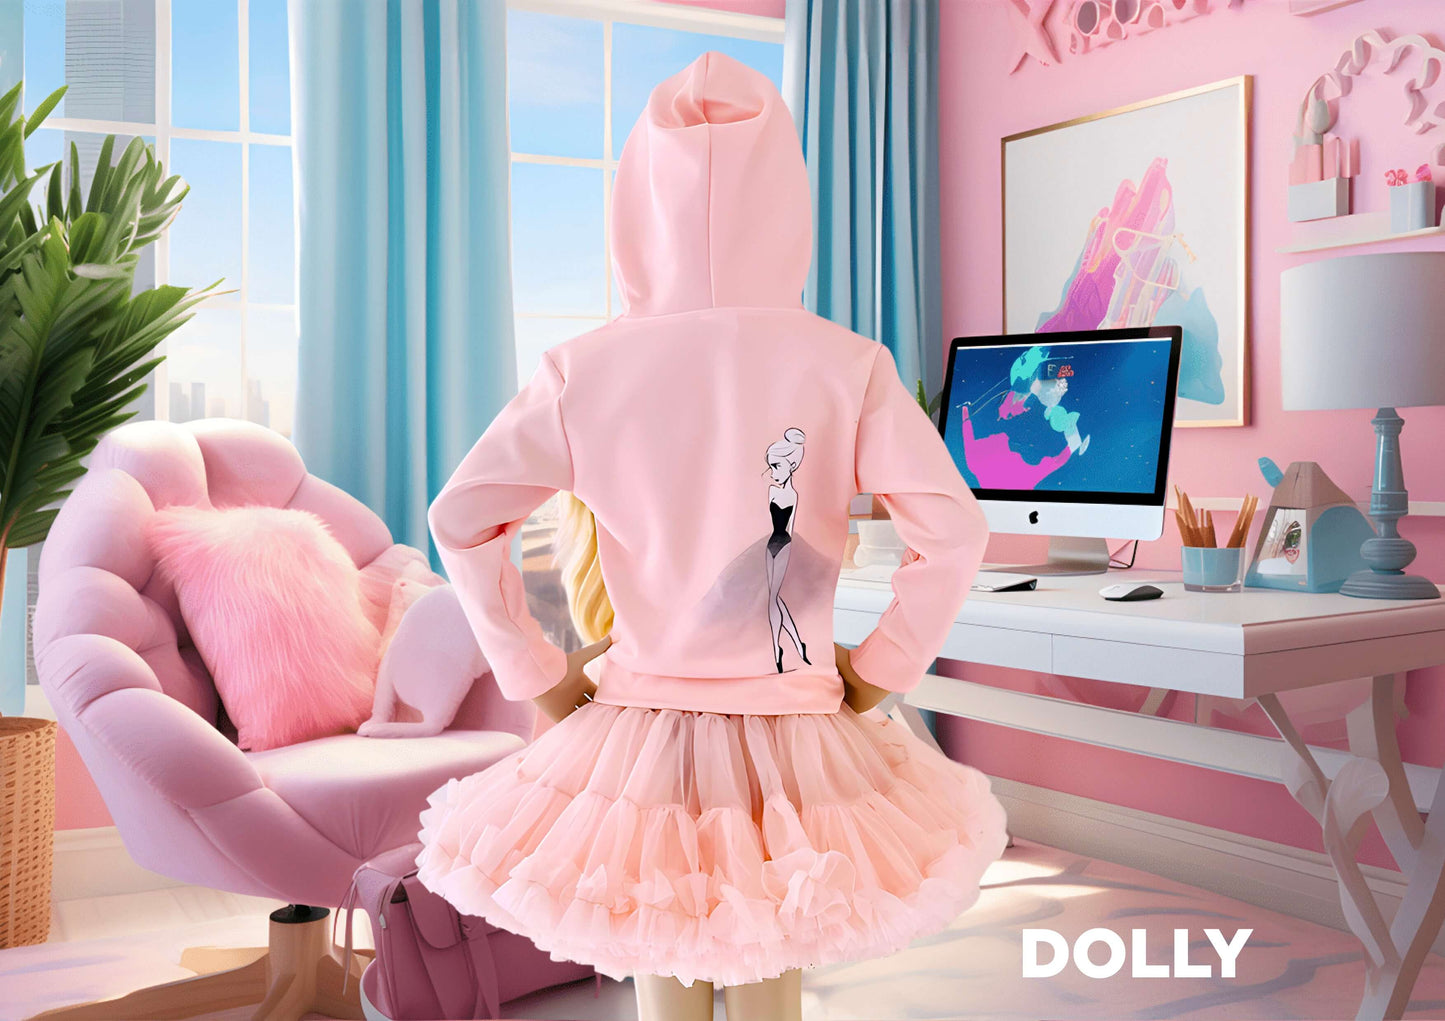 DOLLY by Le Petit Tom ® DOLLYPINK pettiskirt dollypink